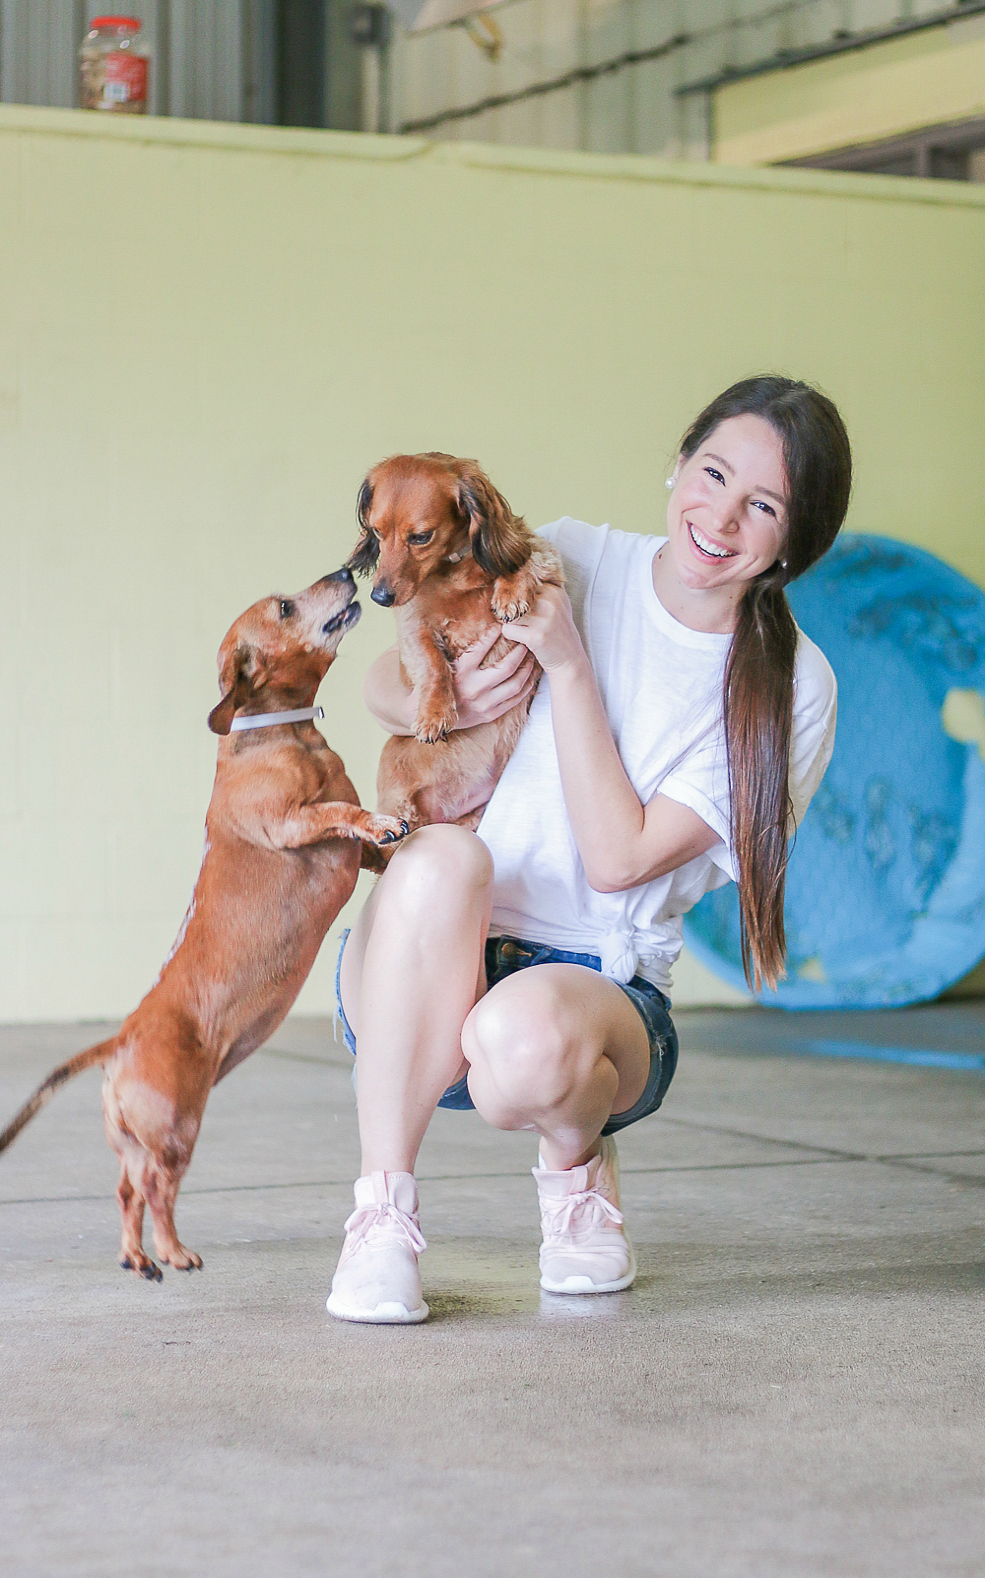 A day at Wayside Waifs Animal Shelter by Missouri blogger and dog mom Stephanie Ziajka from Diary of a Debutante, Clear the Shelters Day information, Clear the Shelters Day 2018